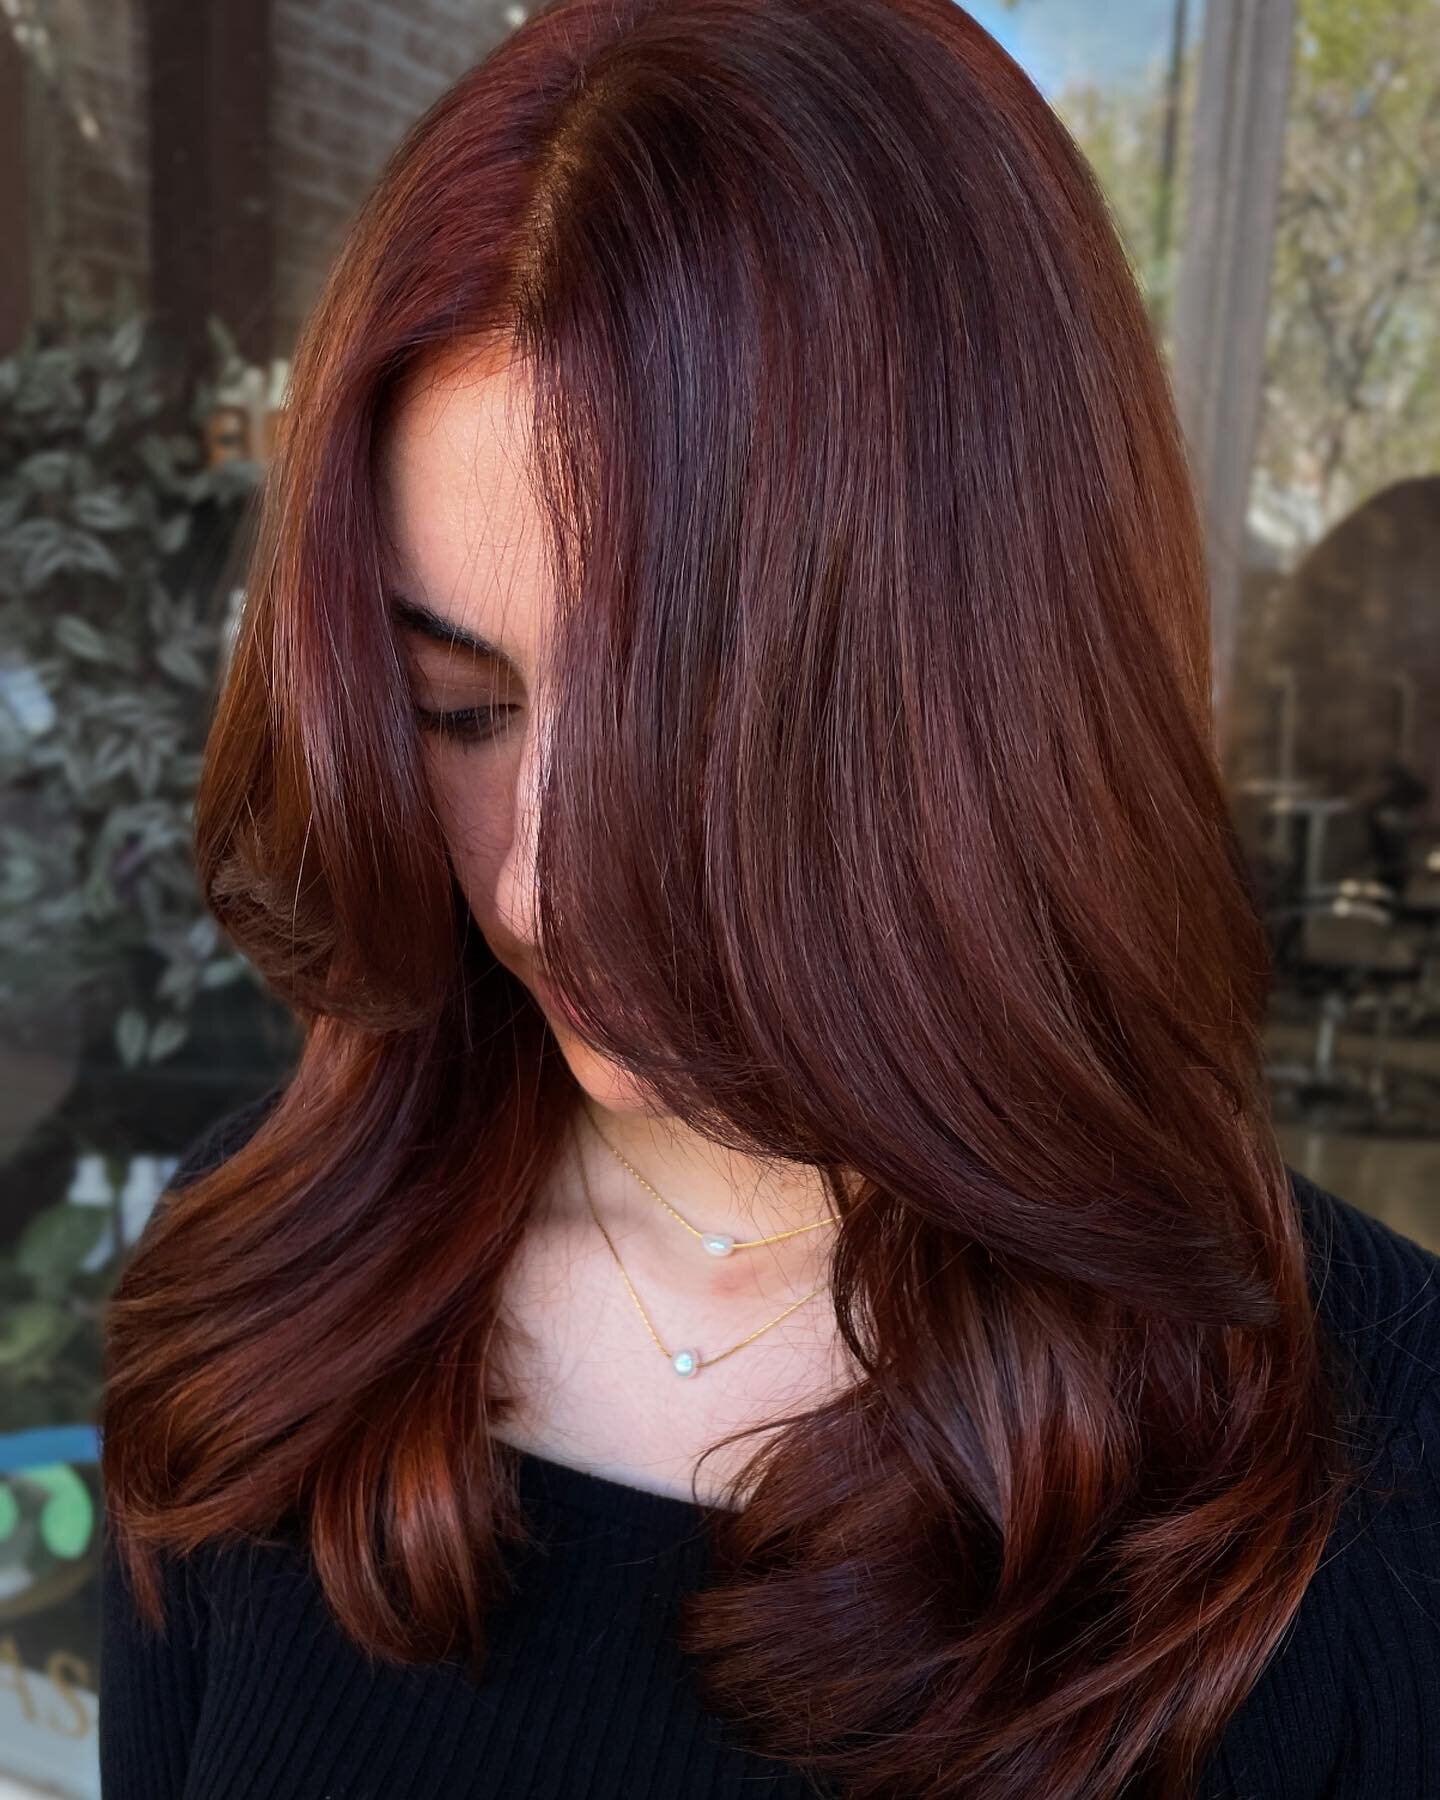 The most autumn hair to ever have autumned 🍁
&bull;
&bull; I'll be honest, sometimes I don't get it in one shot. Luckily, I have amazing clients who have the courage to kindly let me know when they aren't quite satisfied. I was able to bring the cli